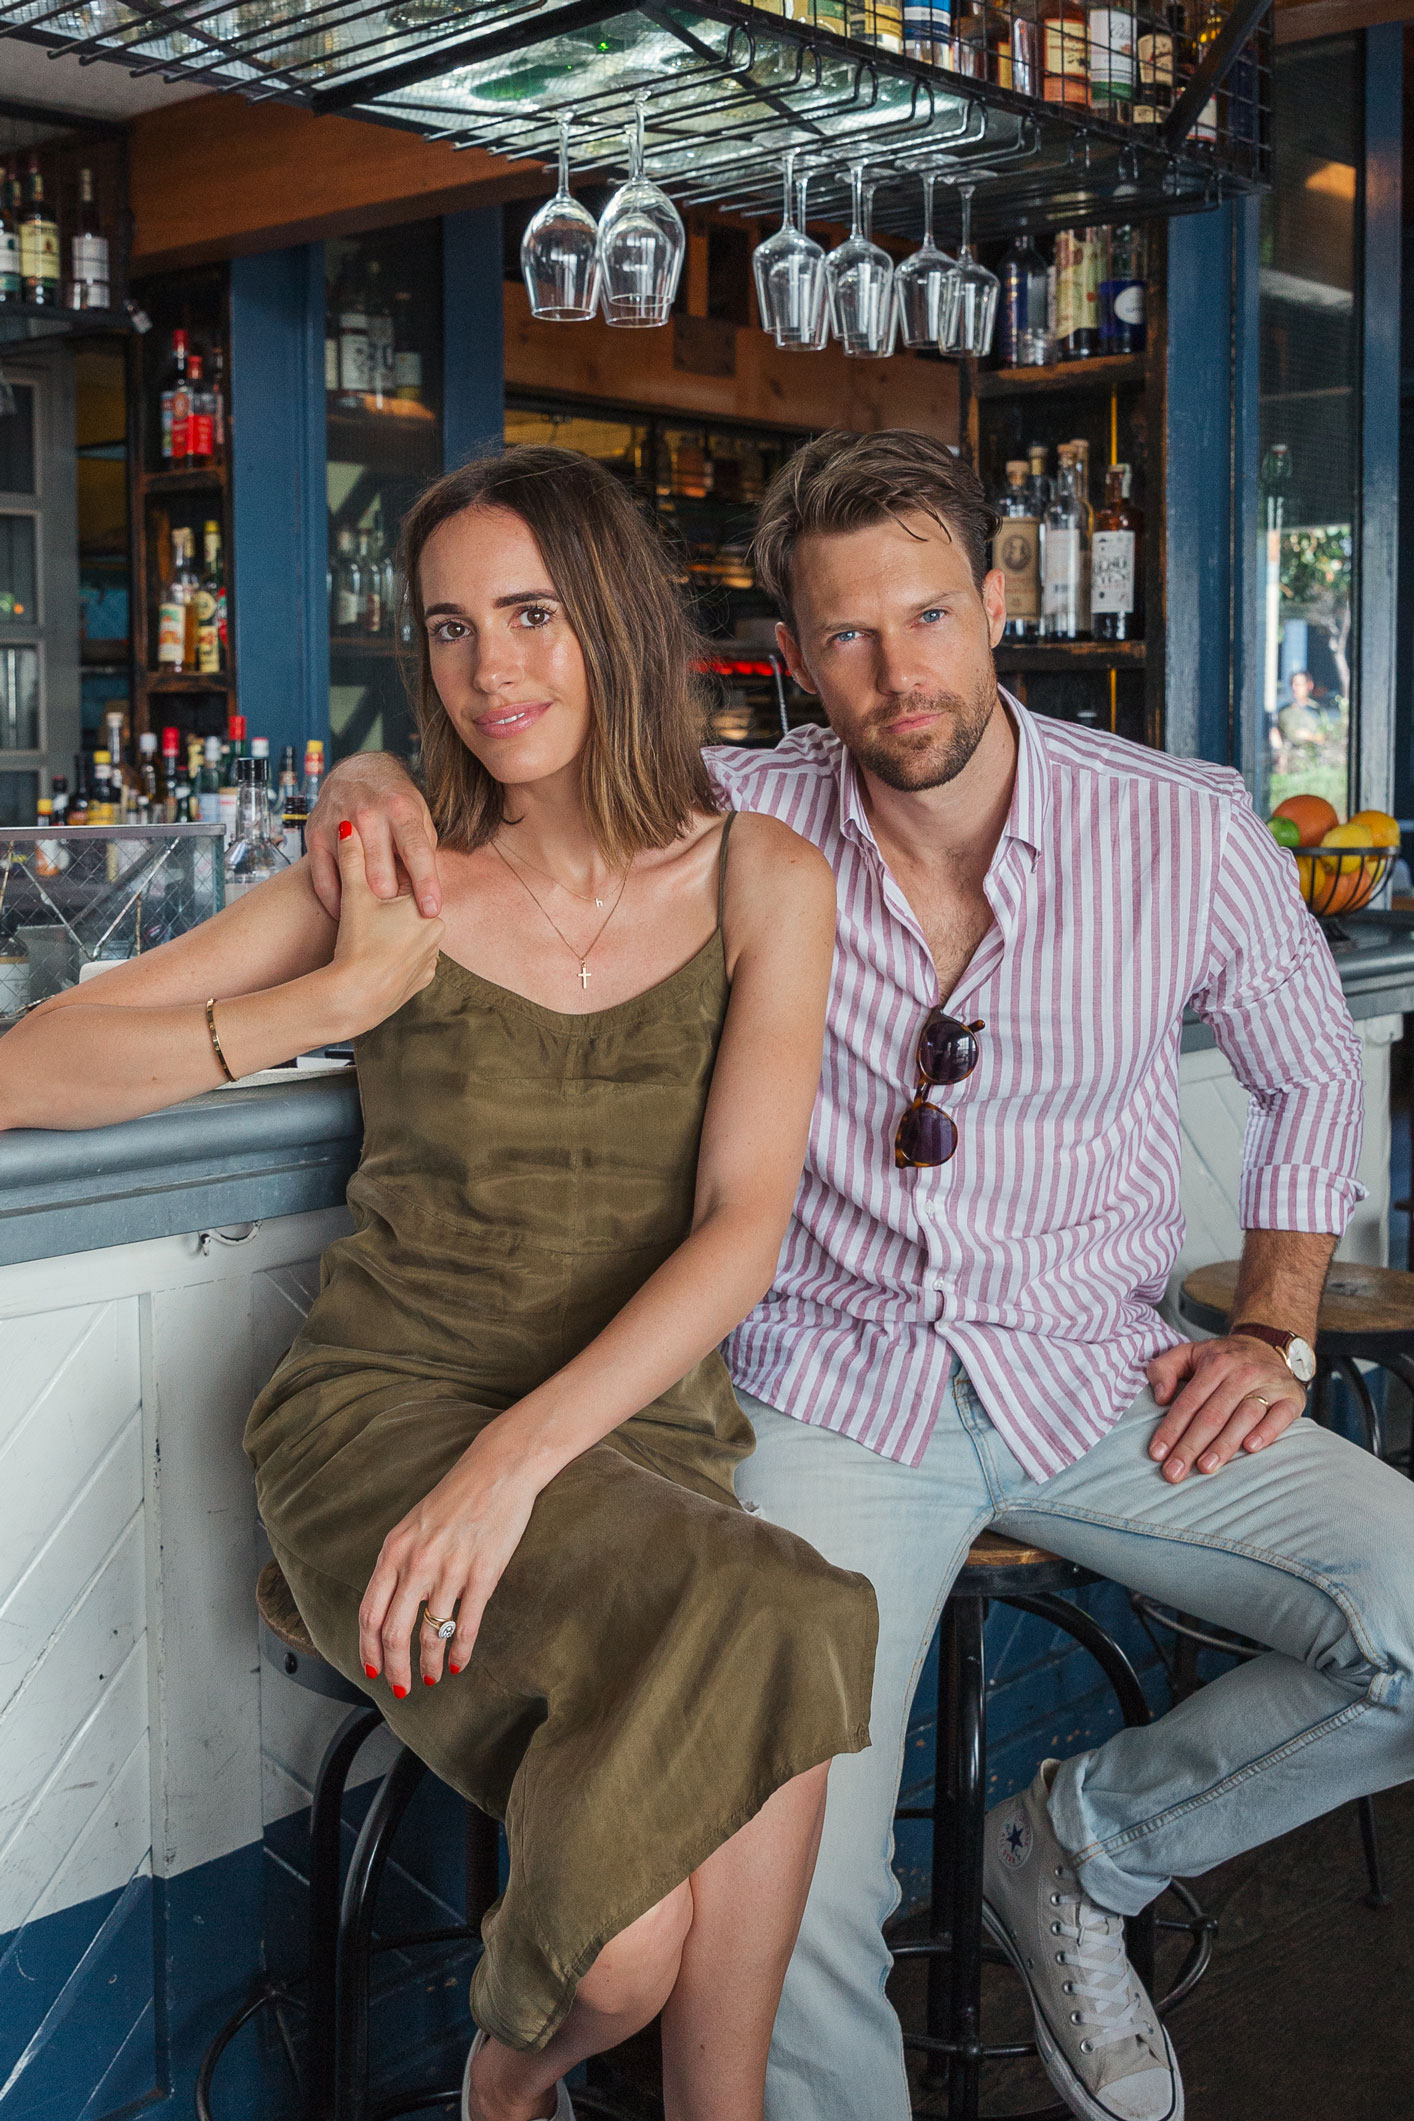 Louise Roe Career Advice On How To Work With Your Partner